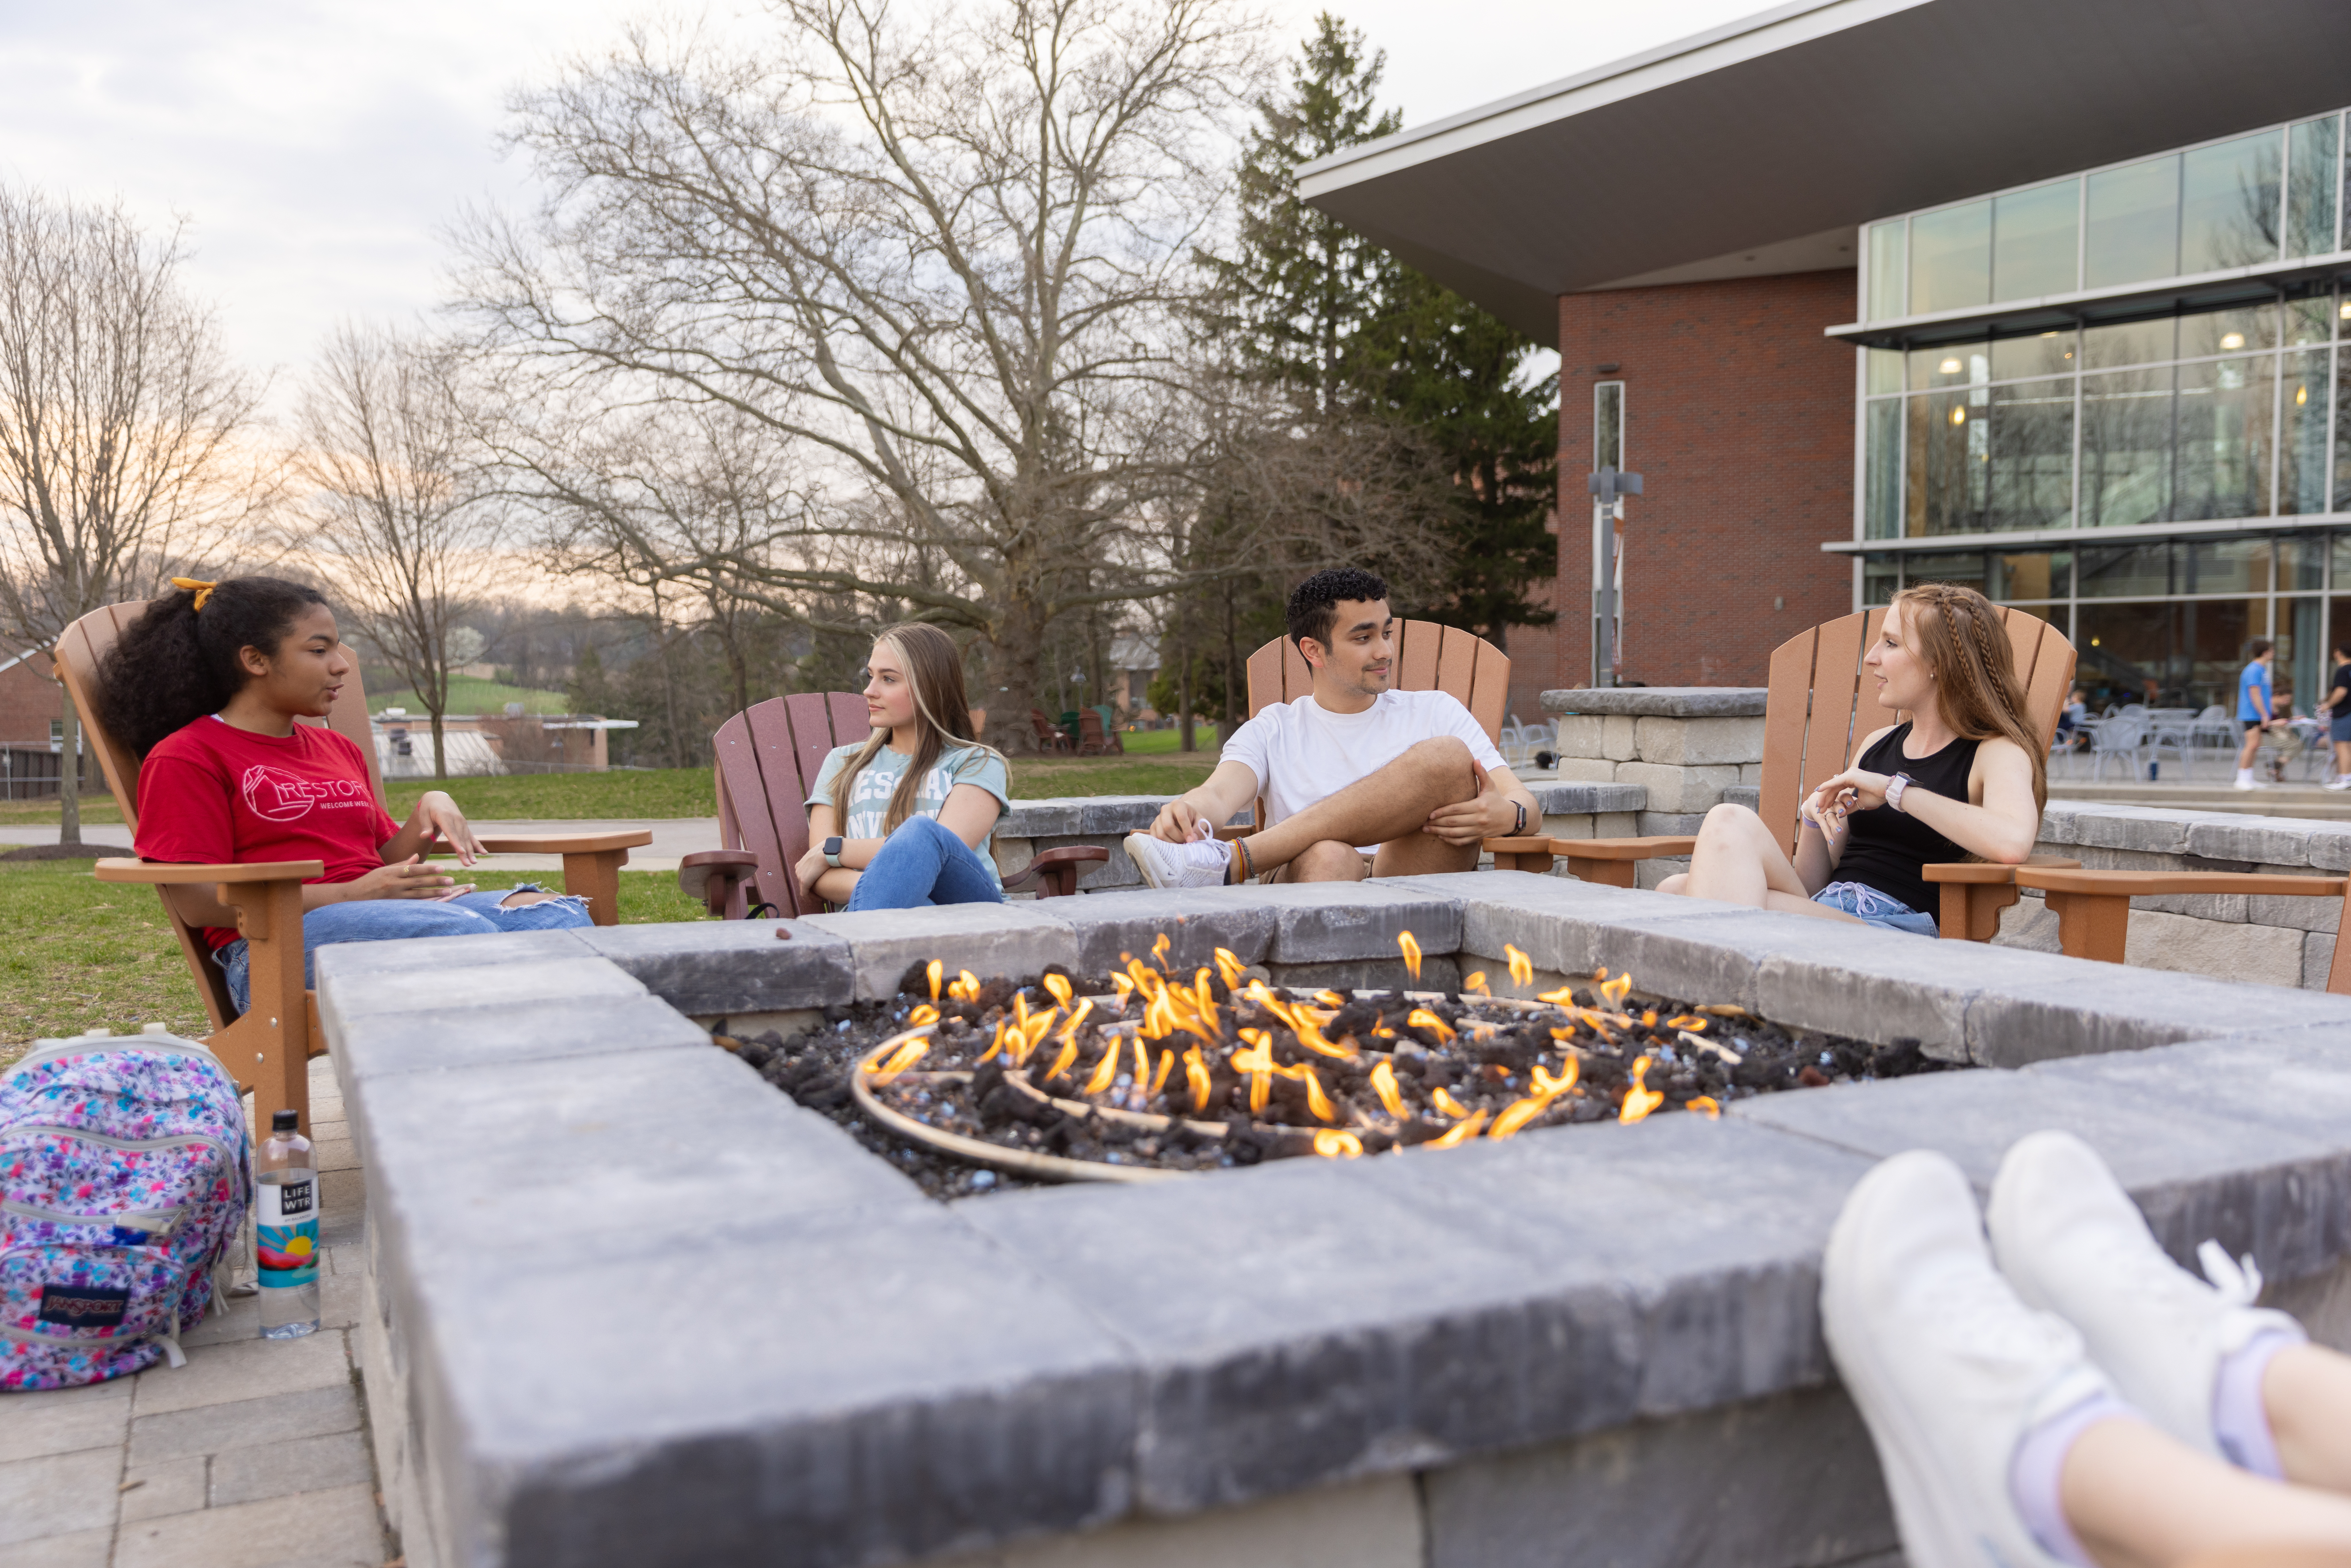 Students gathered and talking around outdoor firepit.